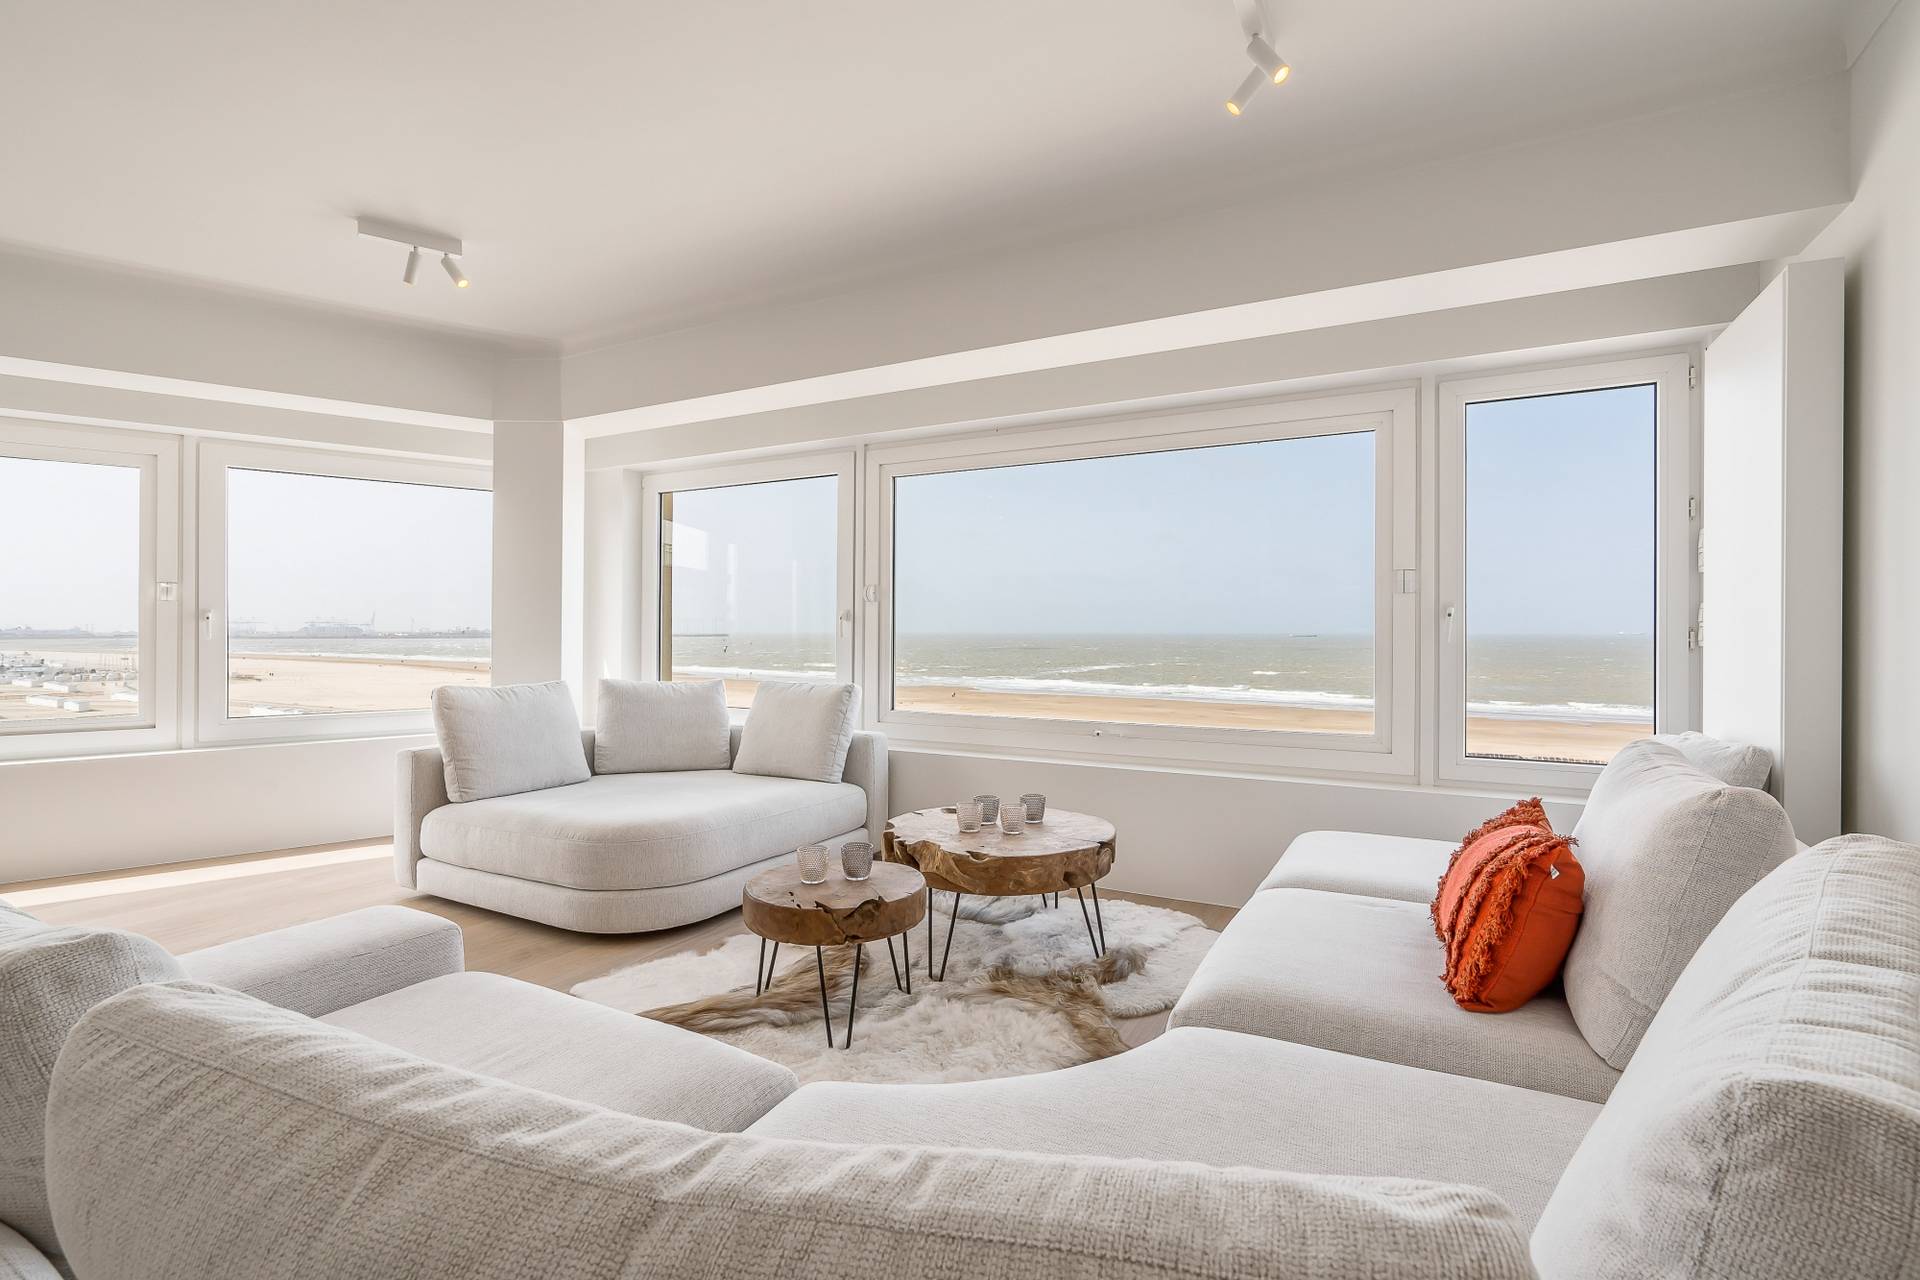 VENTE Appartement 4 CH Knokke-Heist -APPARTEMENT D'ANGLE / VUE MER panoramique